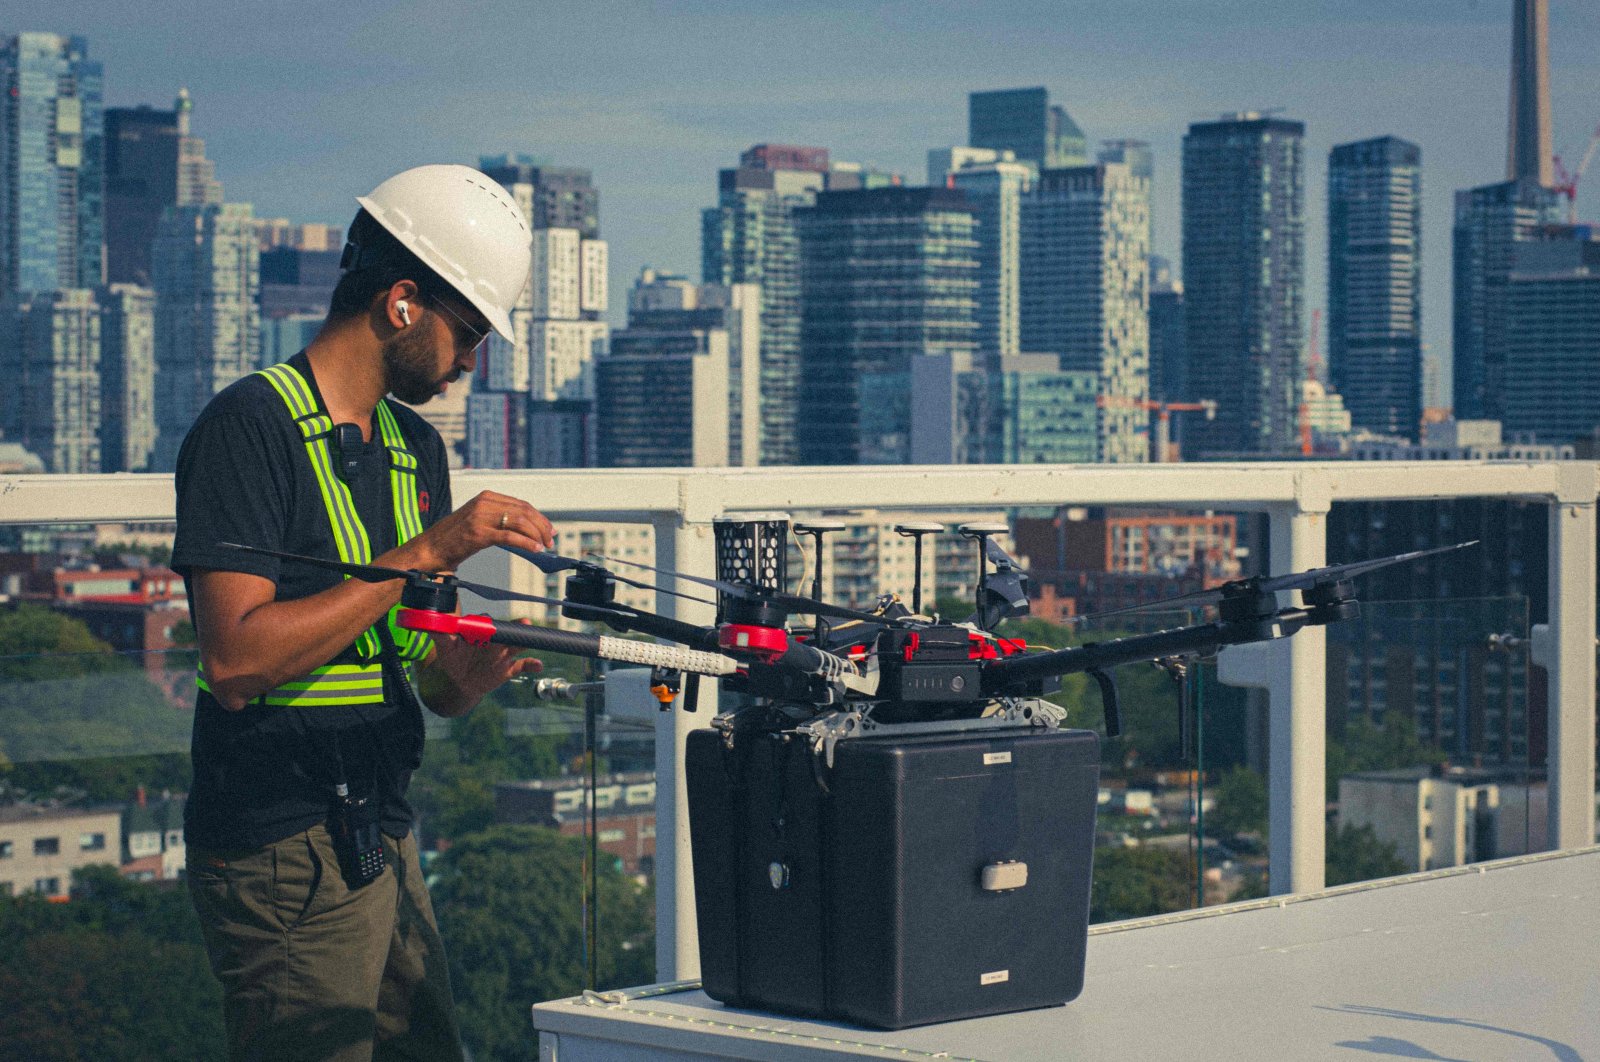 A technician checks Unither Bioelectronique's drone for its historic flight in Toronto, Canada, in this handout photo released by Unither Bioelectronique taken in September 2021. (Unither Bioelectronique via AFP)